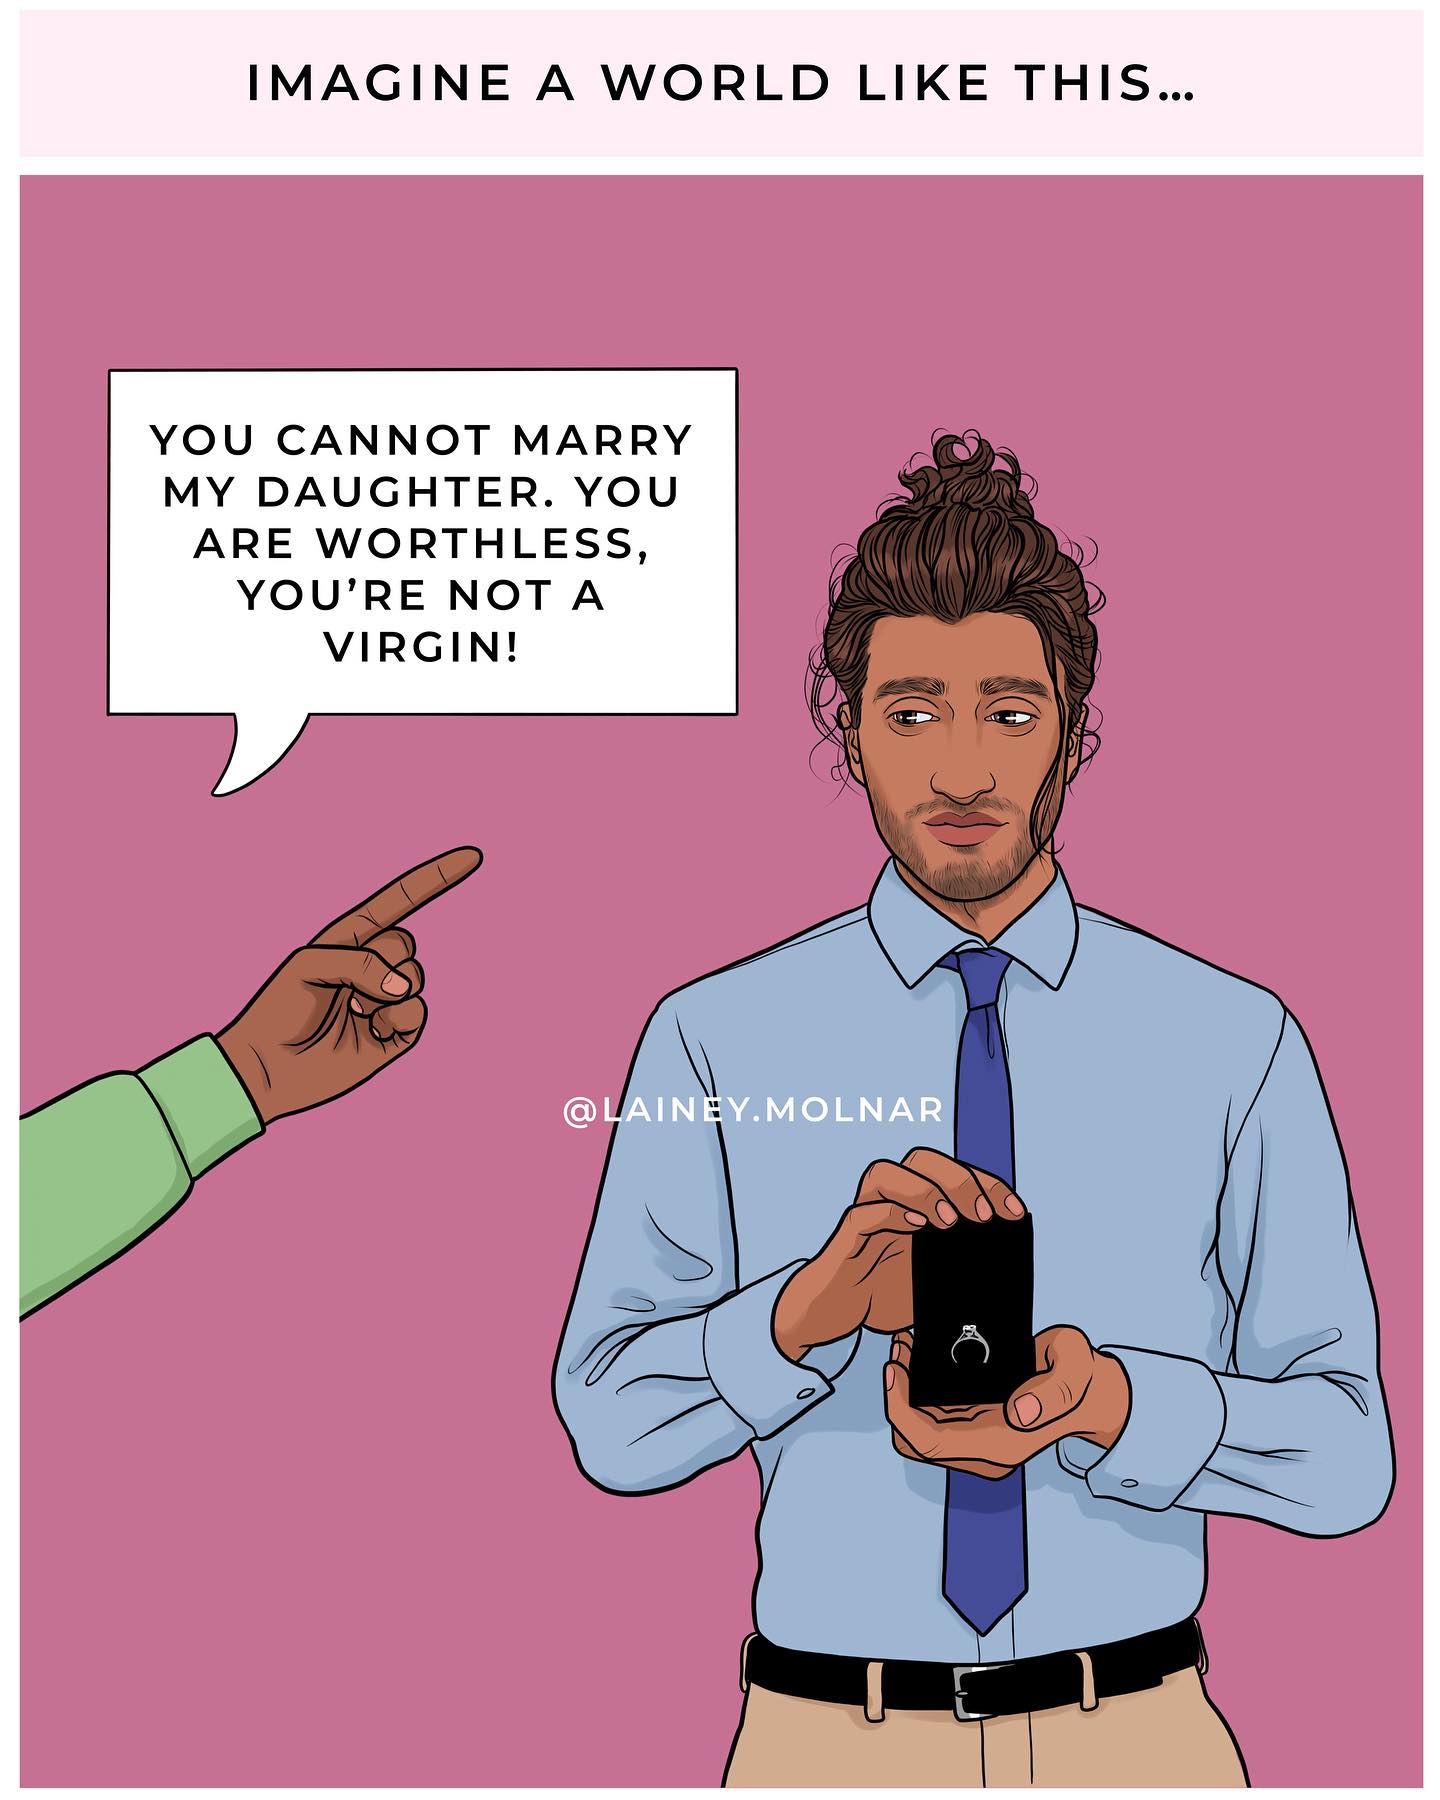 You cannot marry my daughter. You are worthless, you're not a virgin!